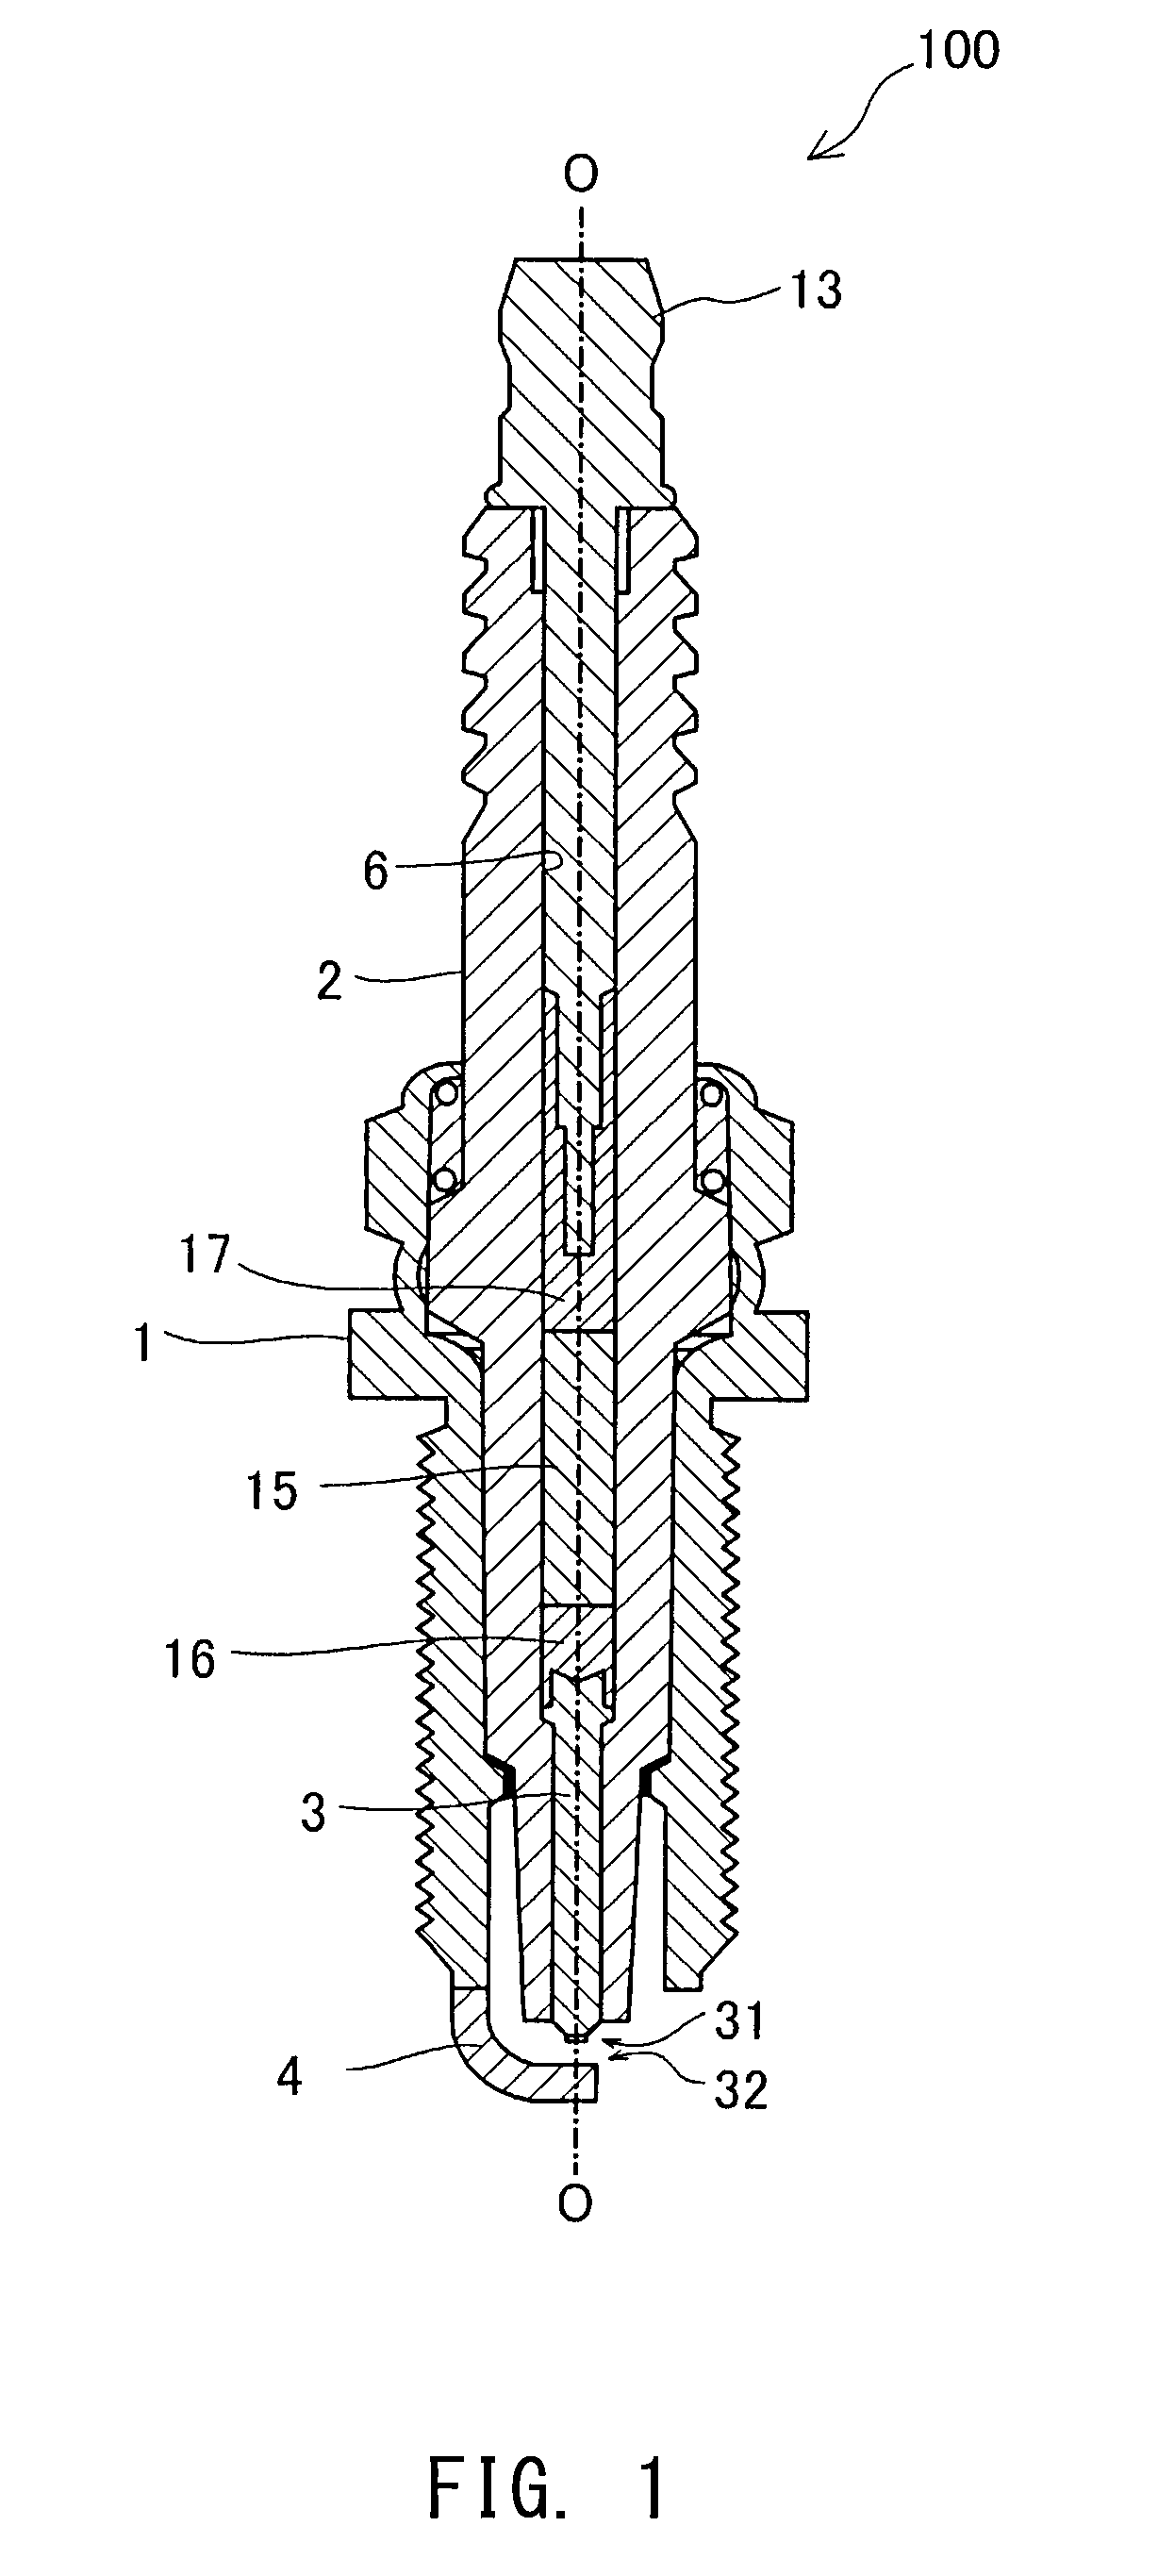 Spark plug with internal resistor having Ti and Zr components